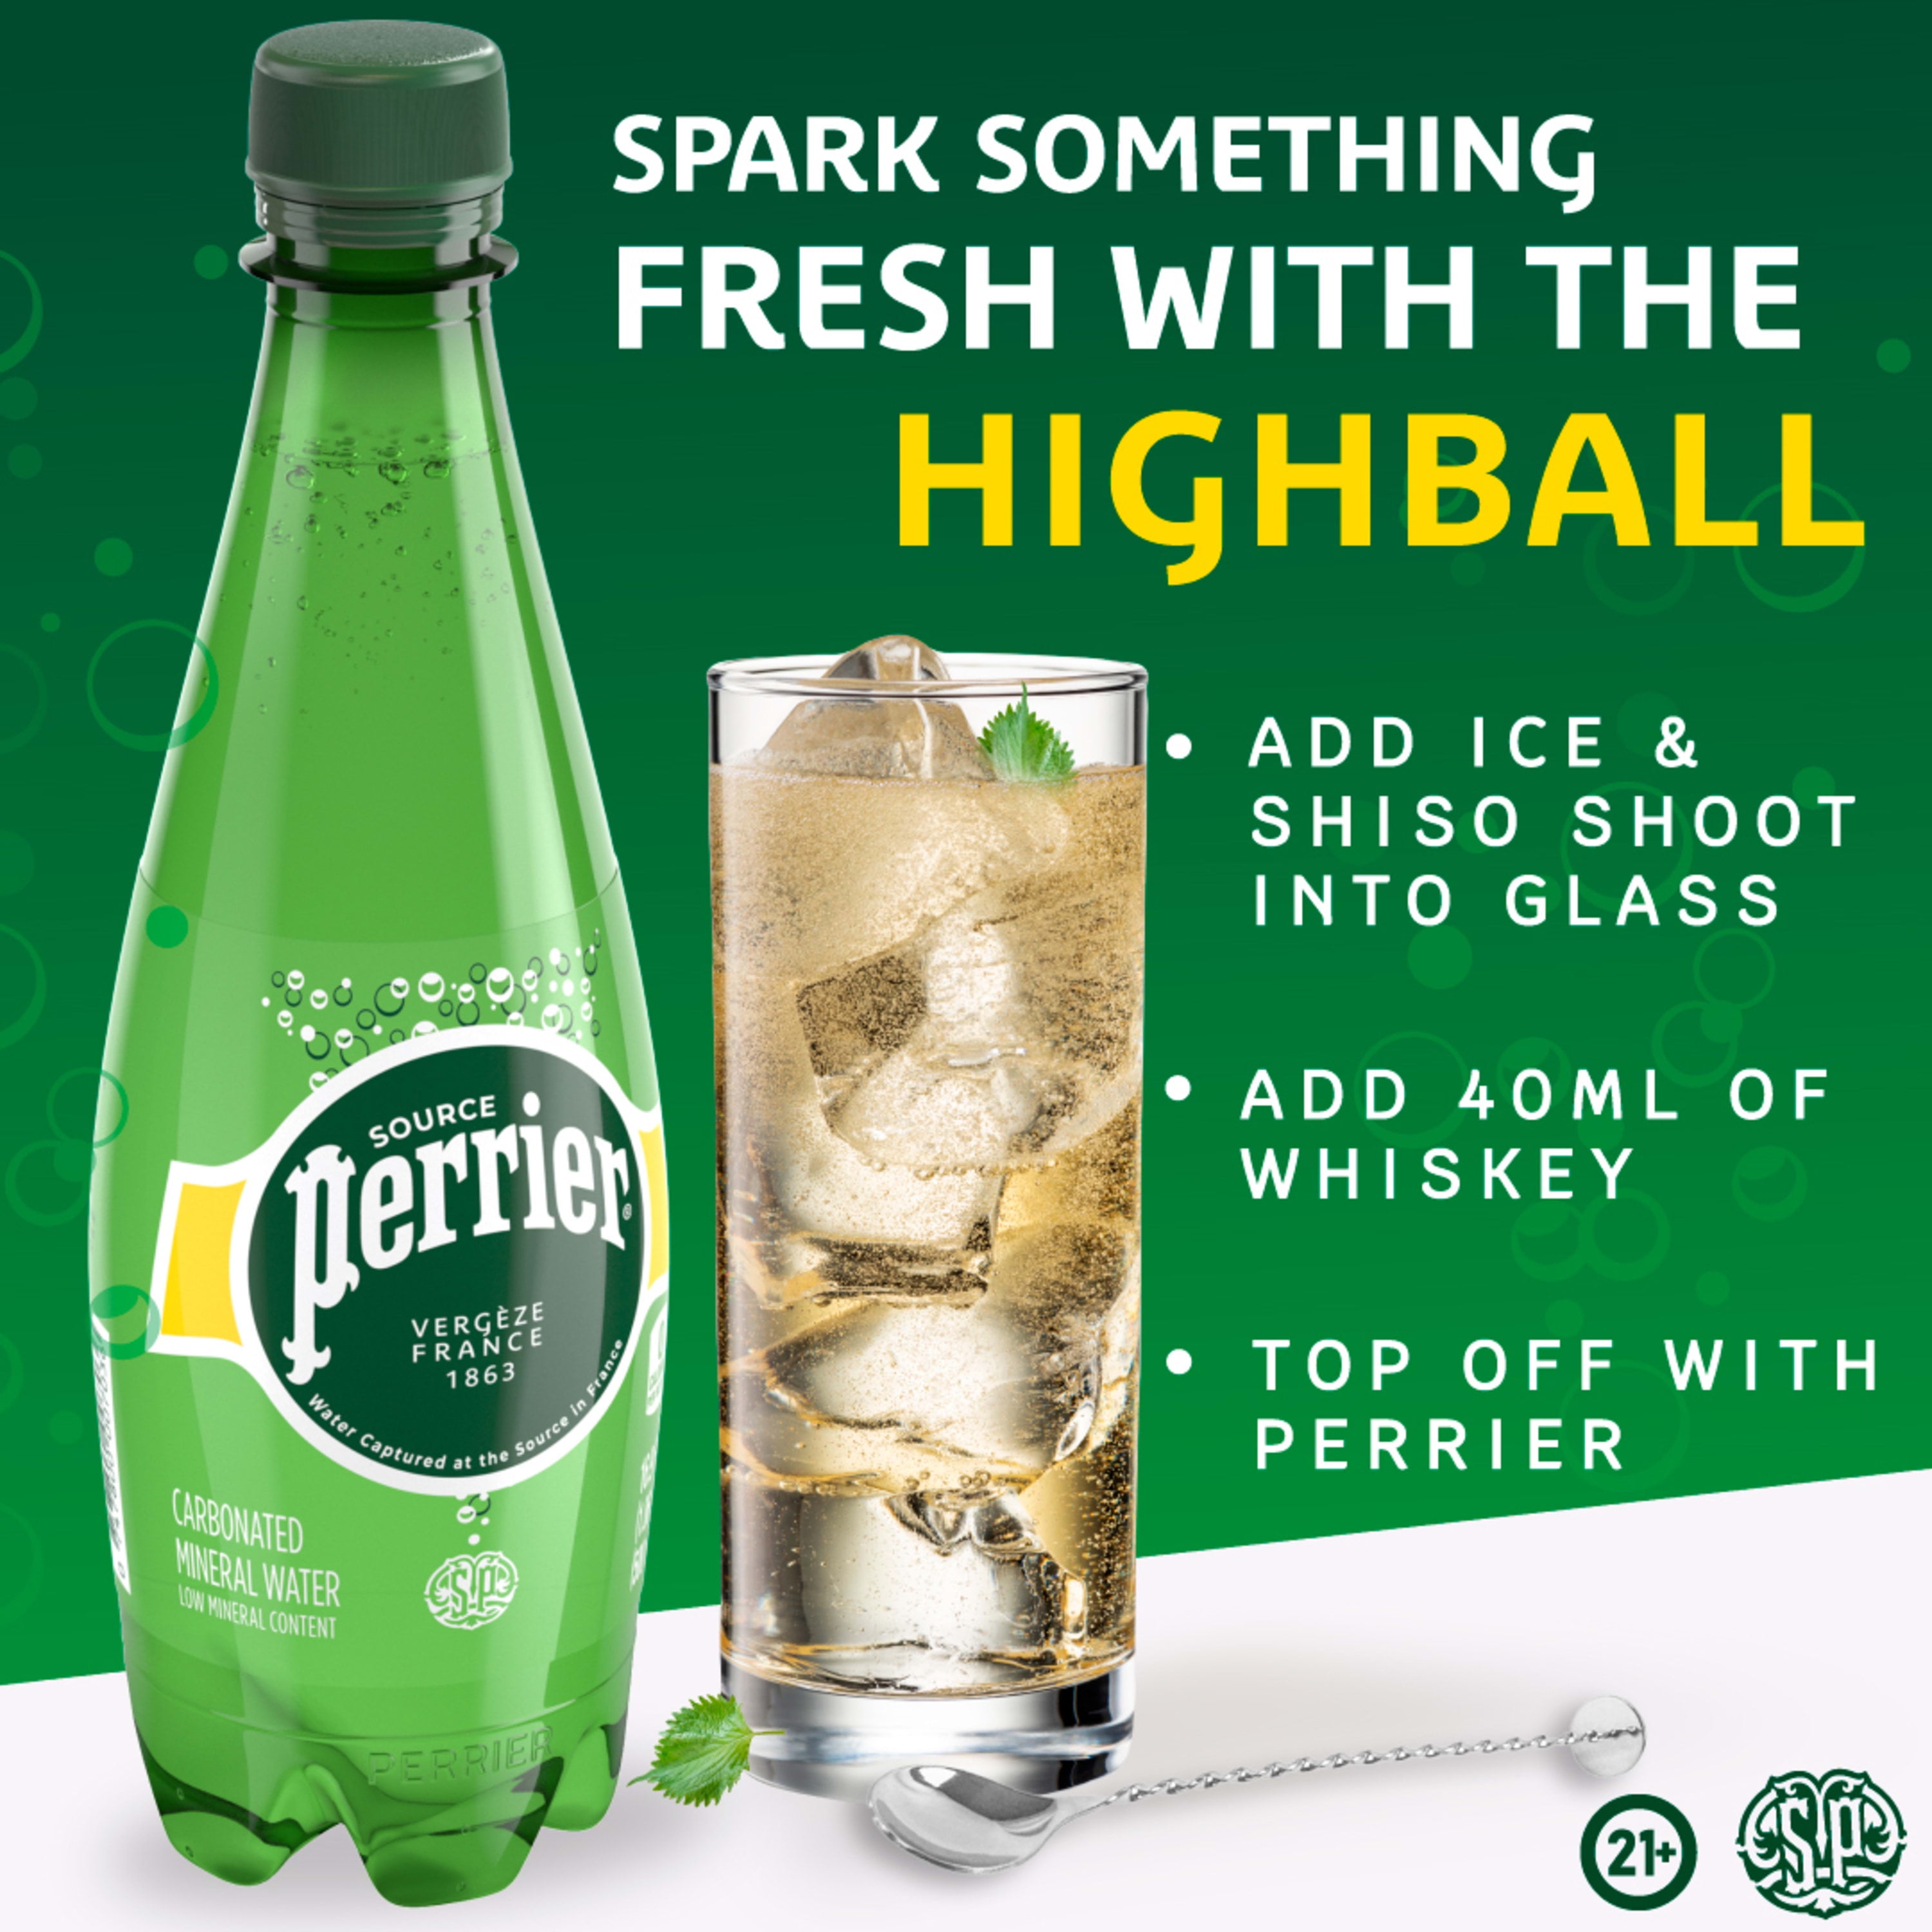 Buy Perrier Carbonated Sparkling Water 330ml, imported (Pack of 4 Bottle) 